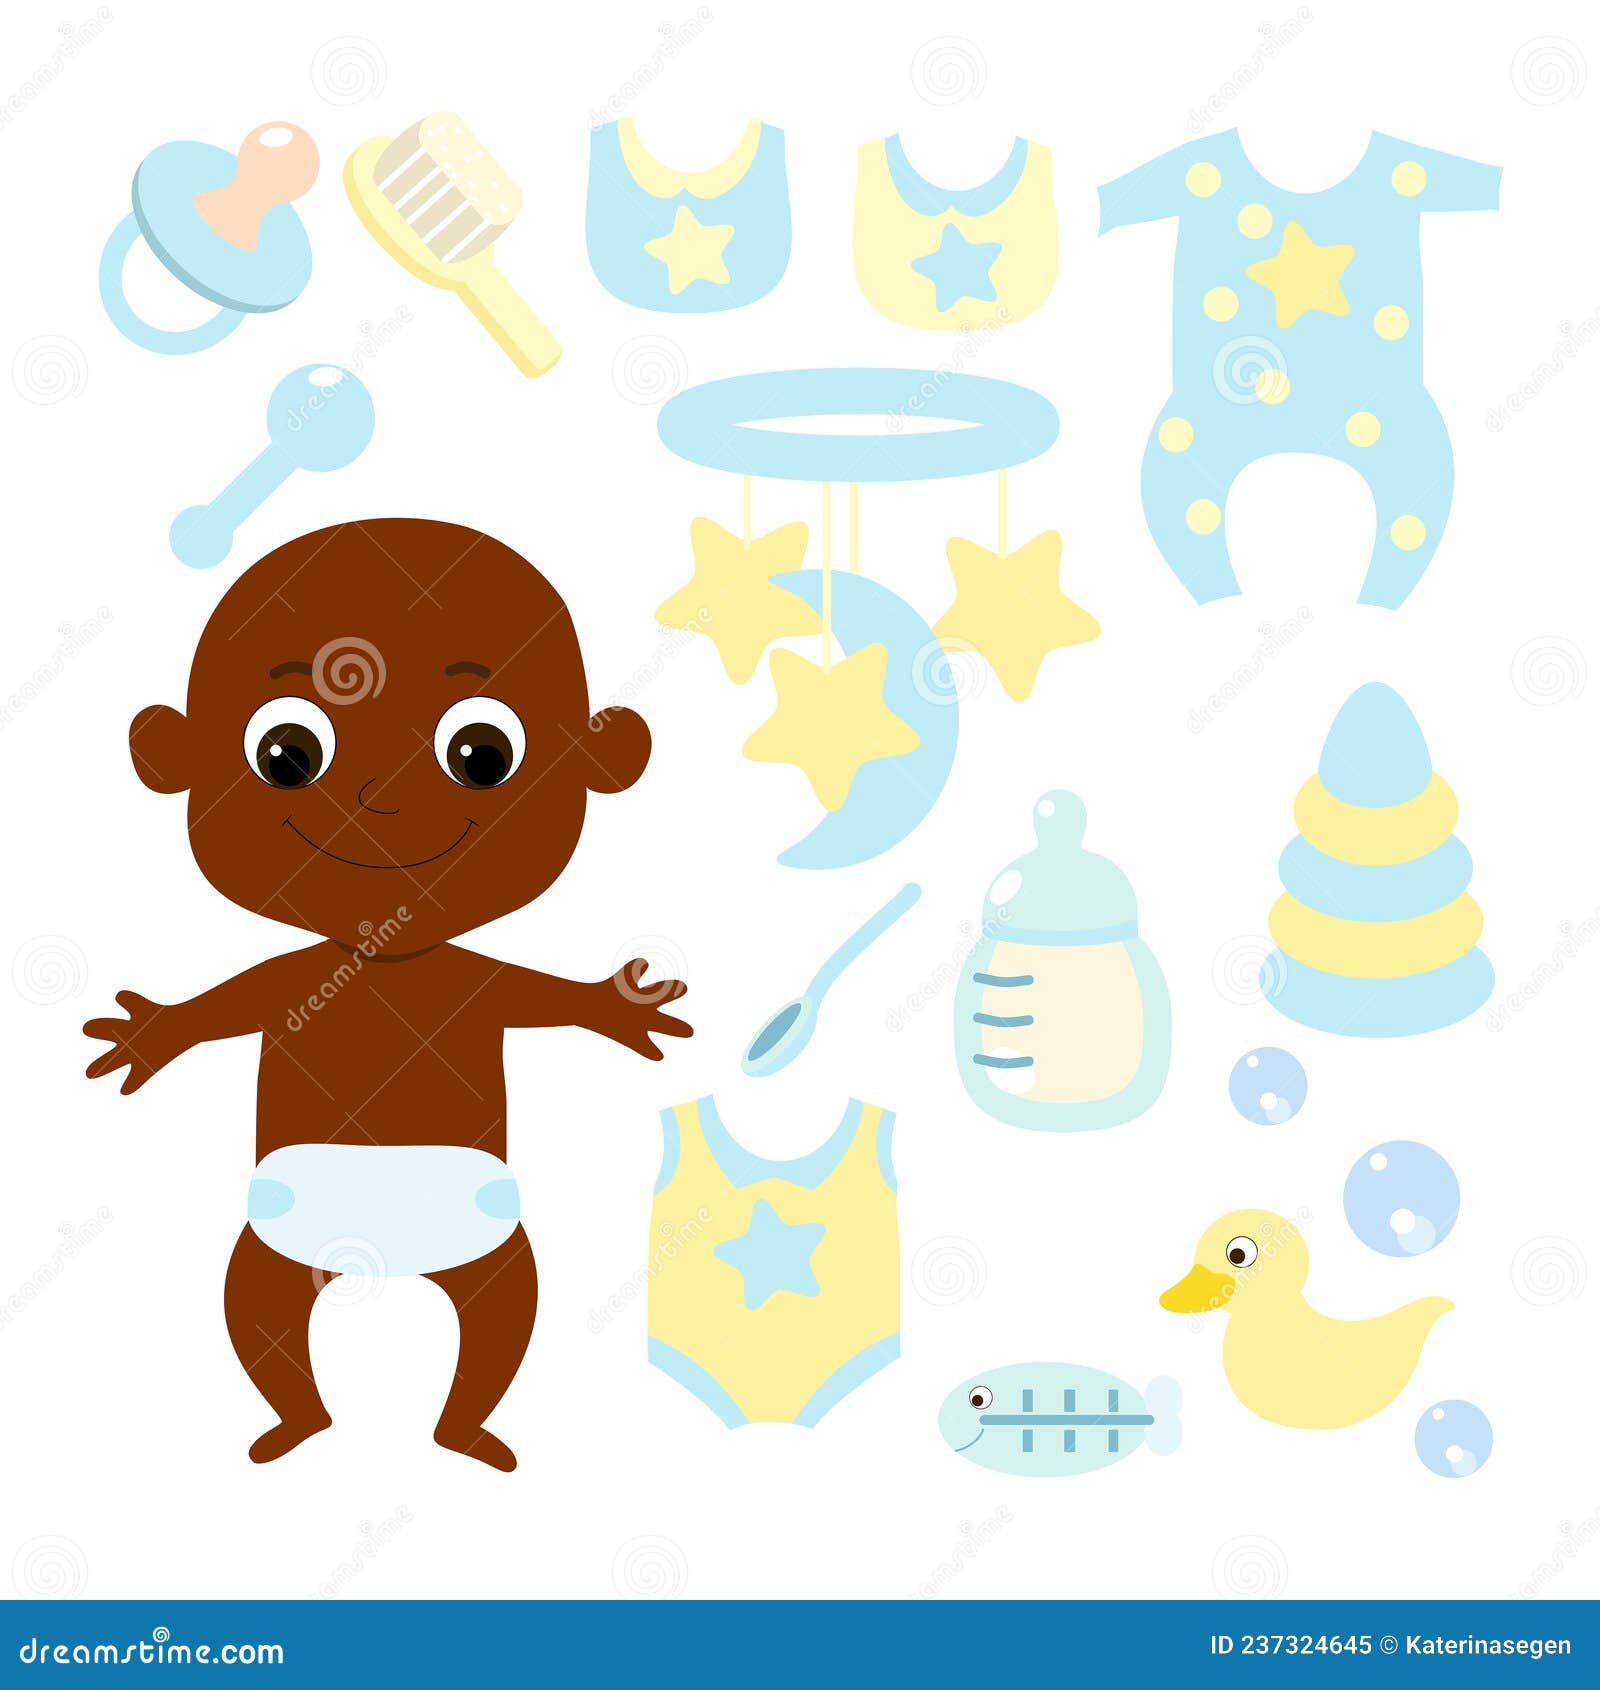 set a small baby african or africanamerican newborn or first year of life and baby items: mobile, comb, feeding bottle.